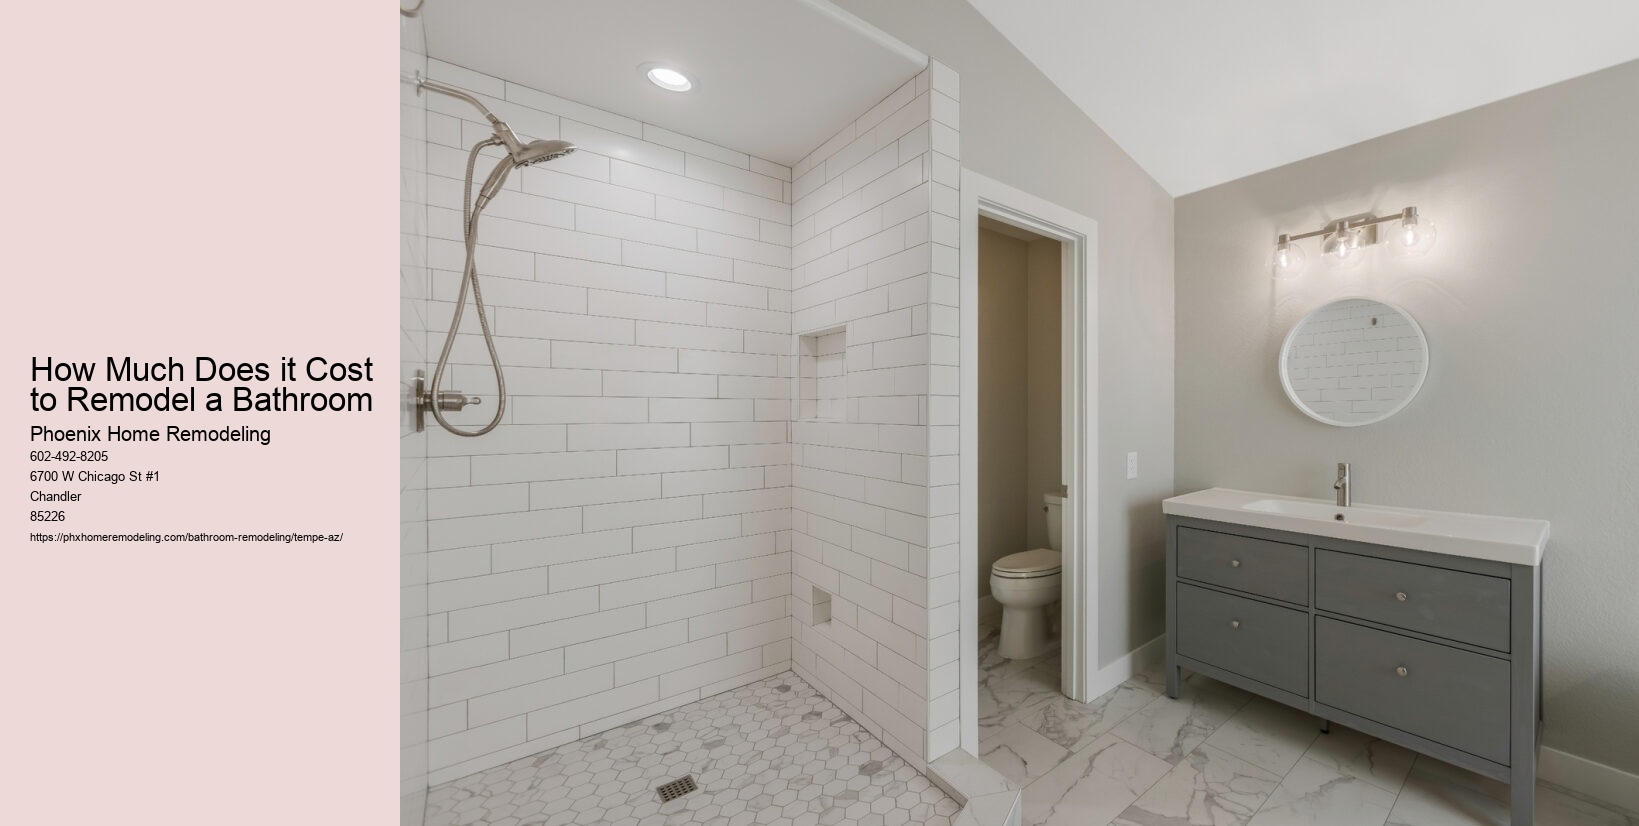 How Much Does it Cost to Remodel a Bathroom